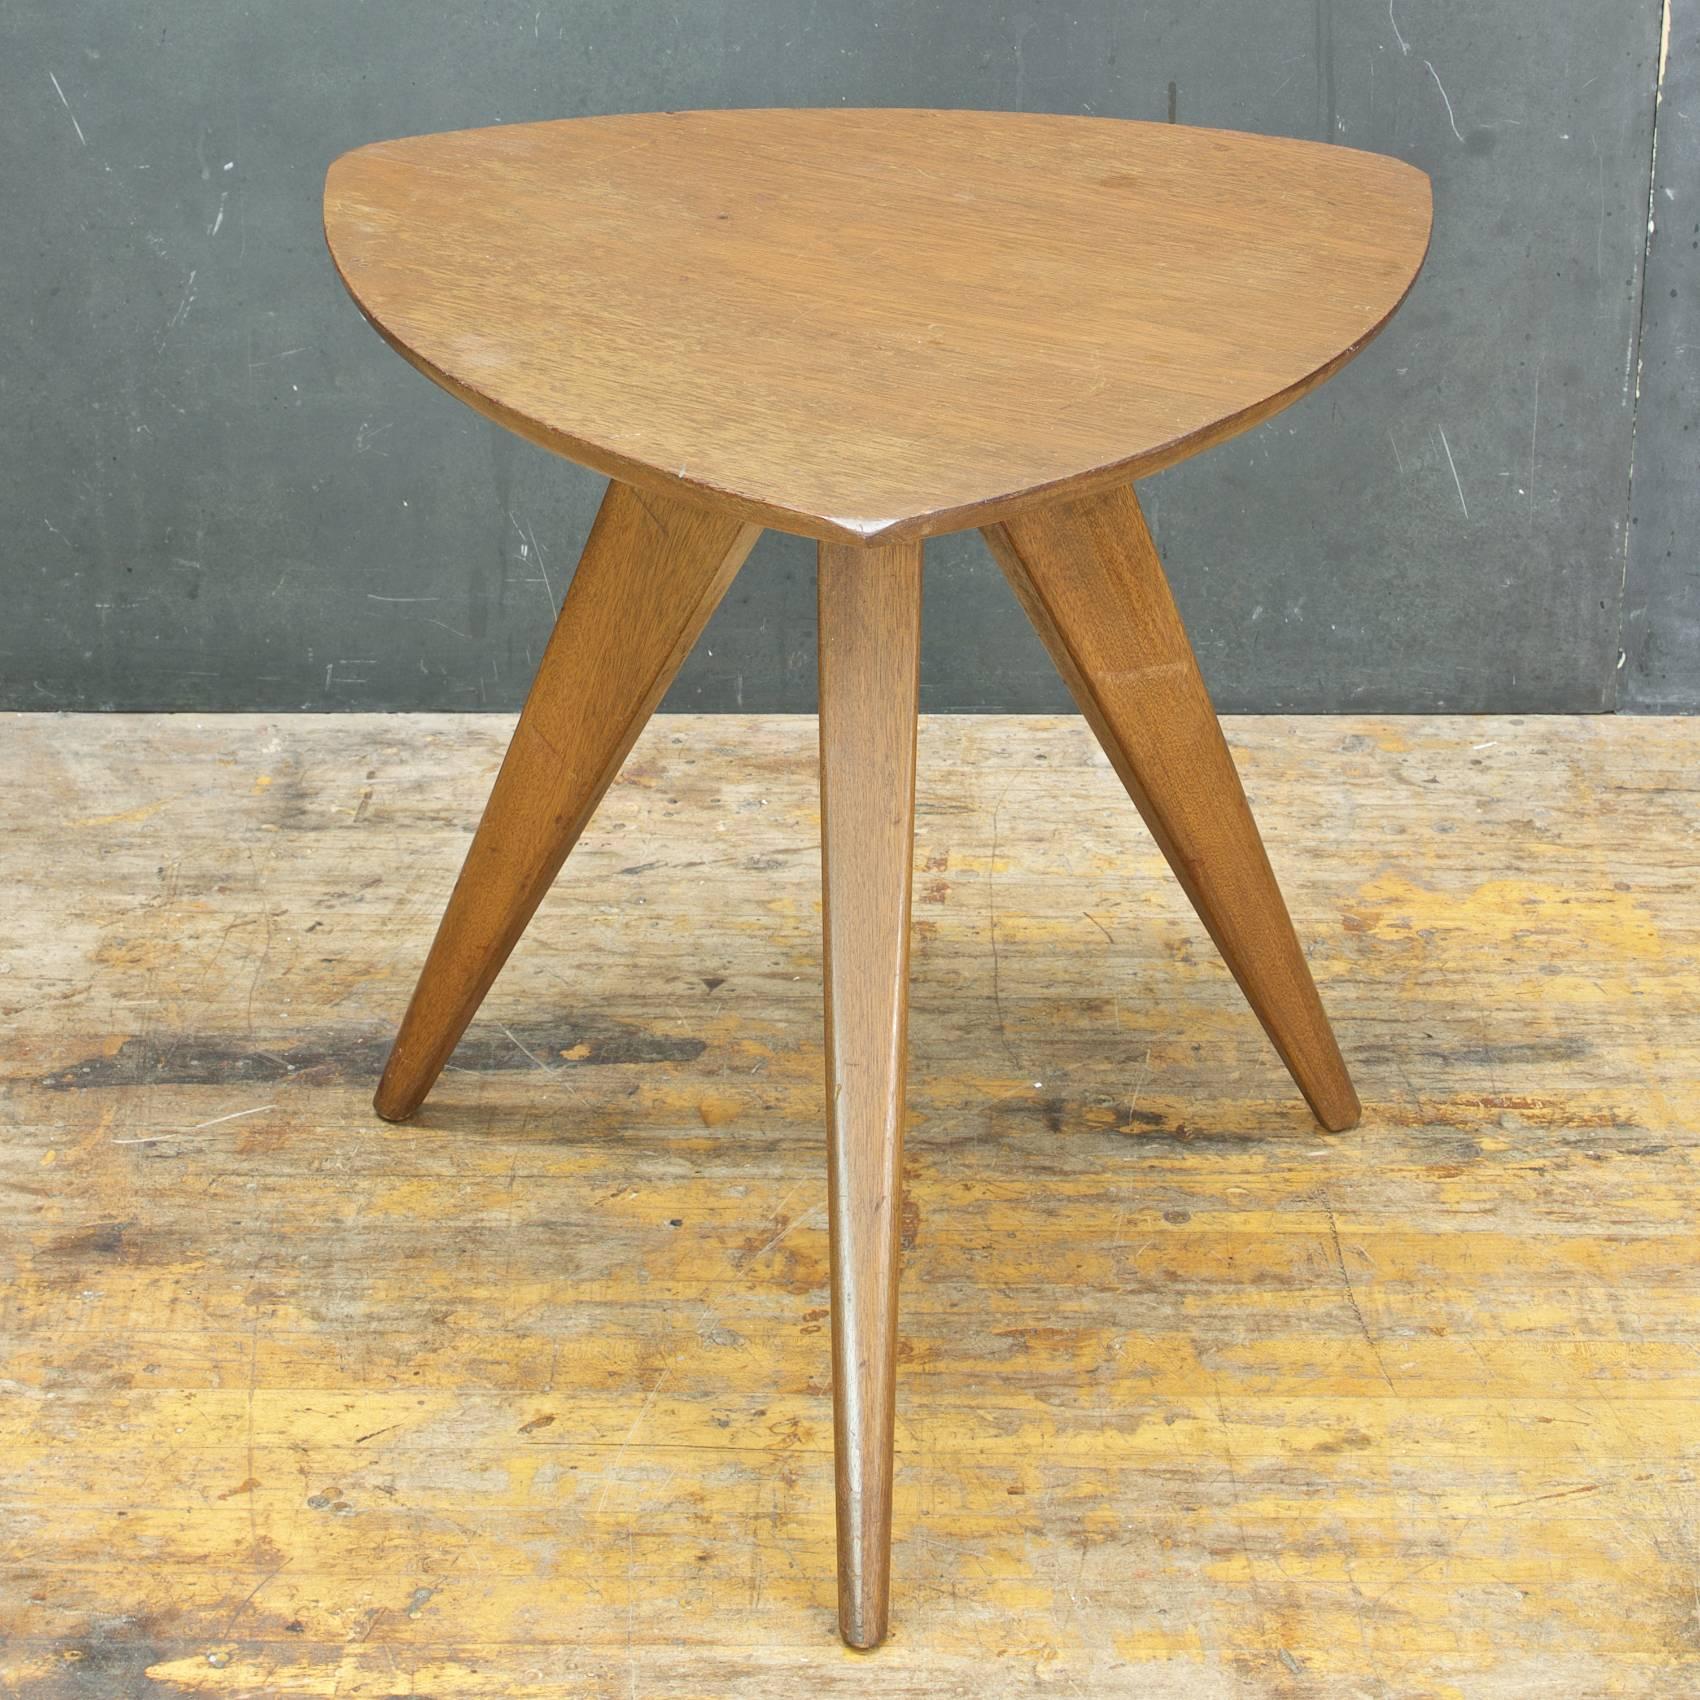 American Early Modernist Form. Presented in Original Finish.  Showing Staining and Wear, Patina to all surfaces. Table was professionally attended to, now very tight and sturdy.